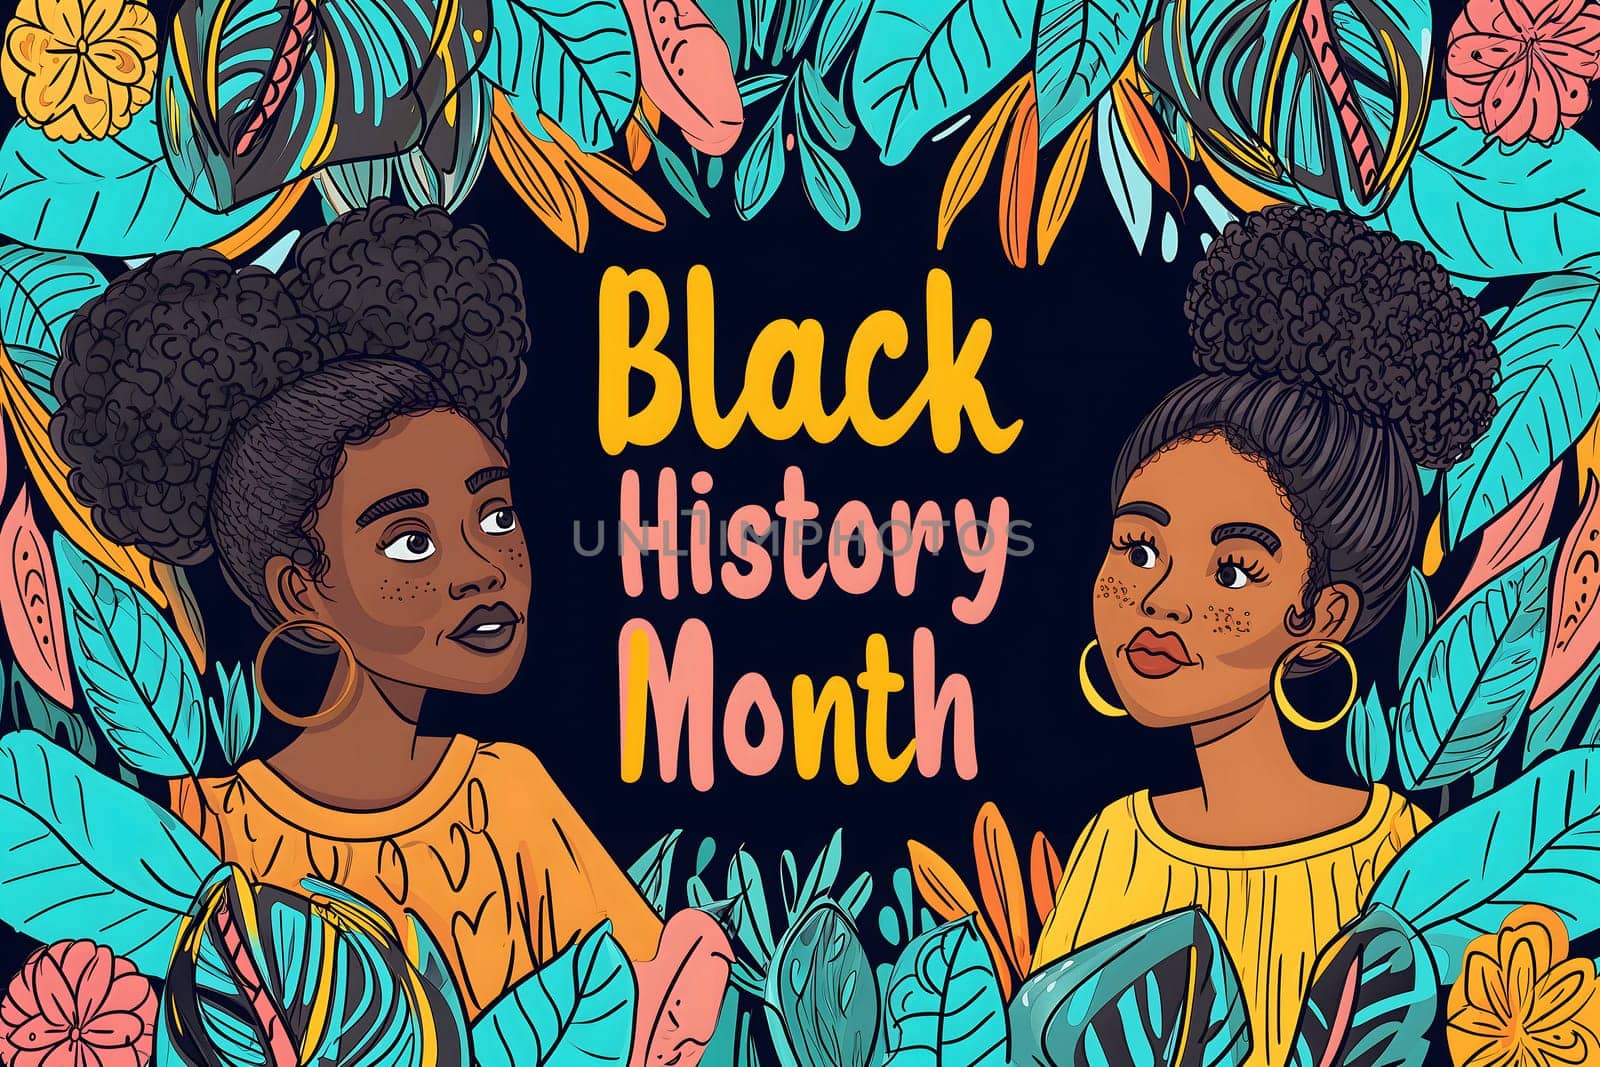 Simple cartoon Black History Month background. Neural network generated image. Not based on any actual scene or pattern.